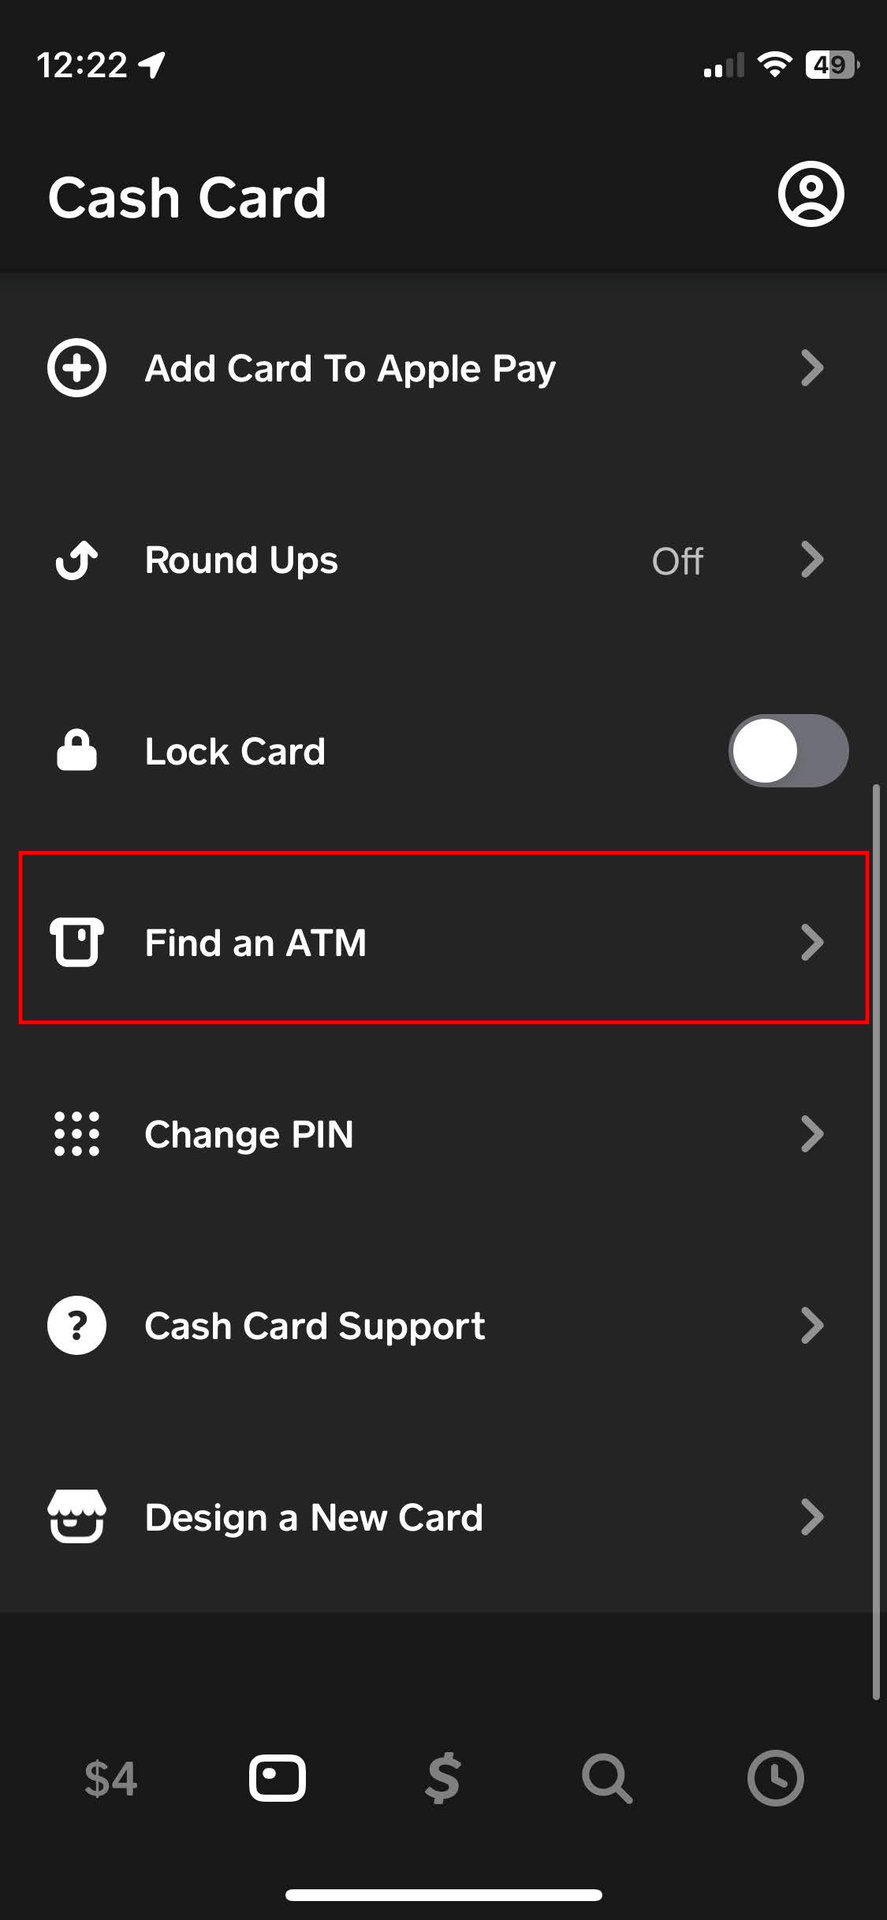 How to find a Cash App ATM 2